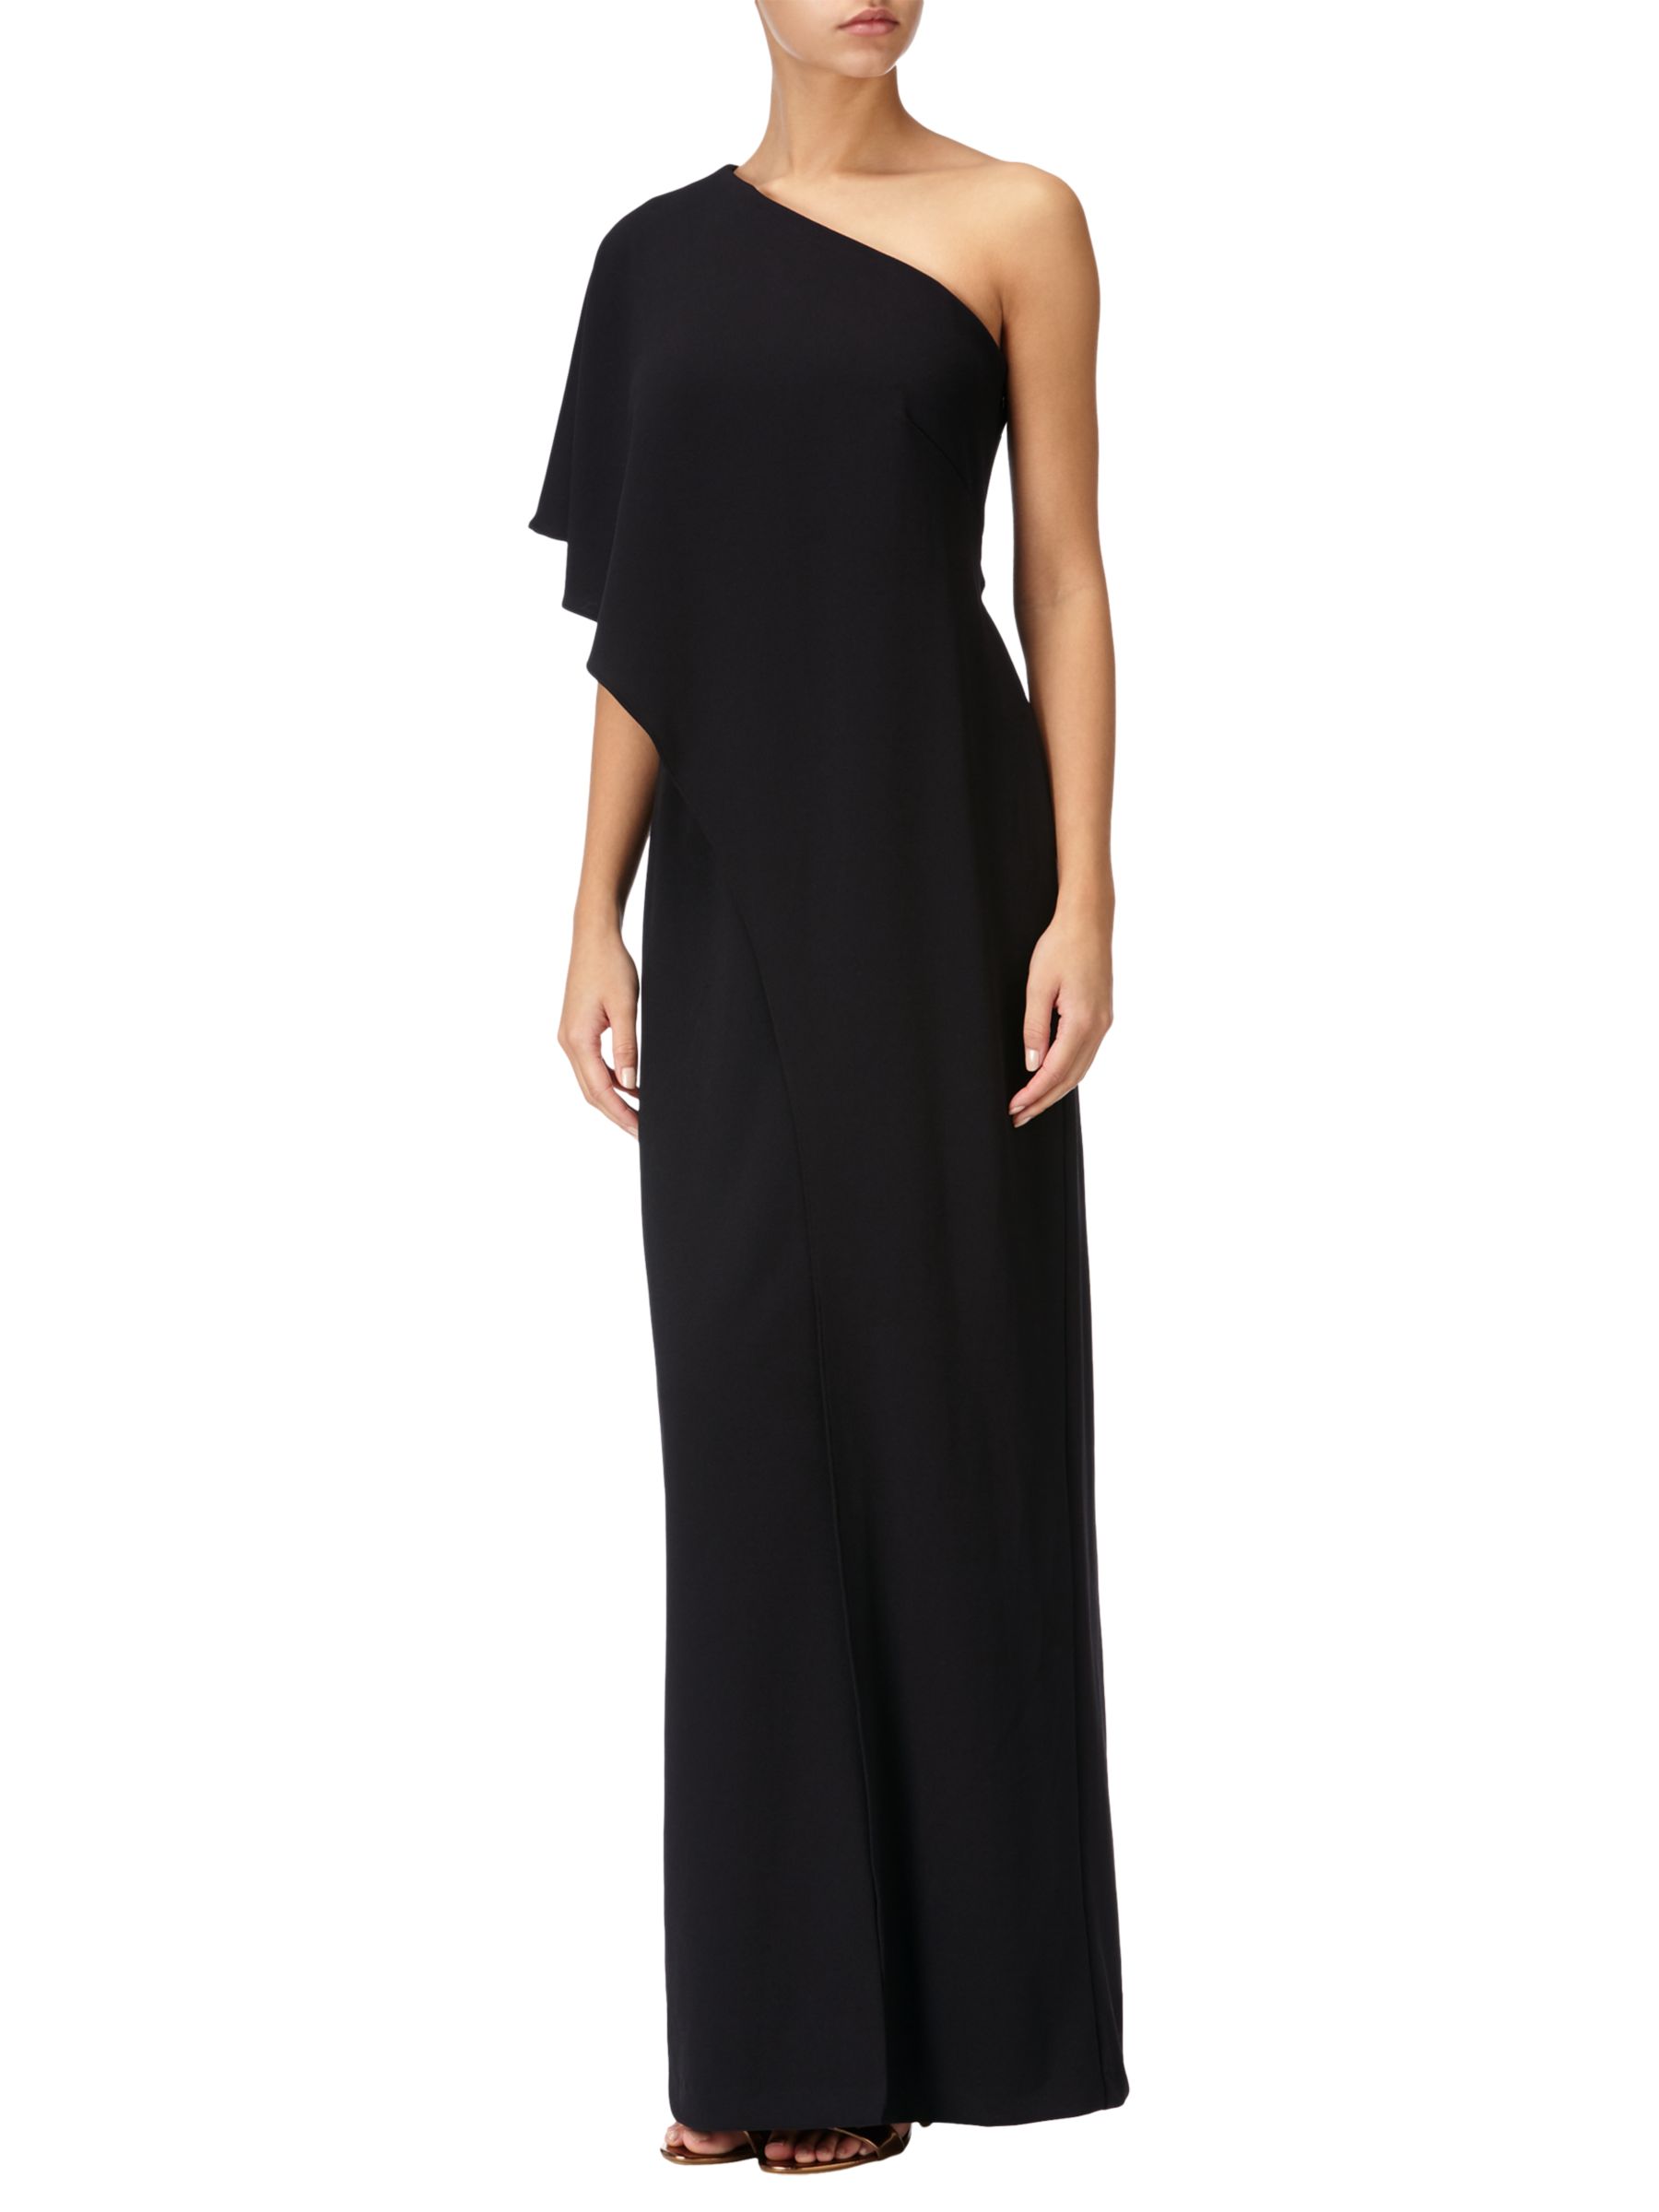 Adrianna Papell One Shoulder Gown, Black at John Lewis & Partners